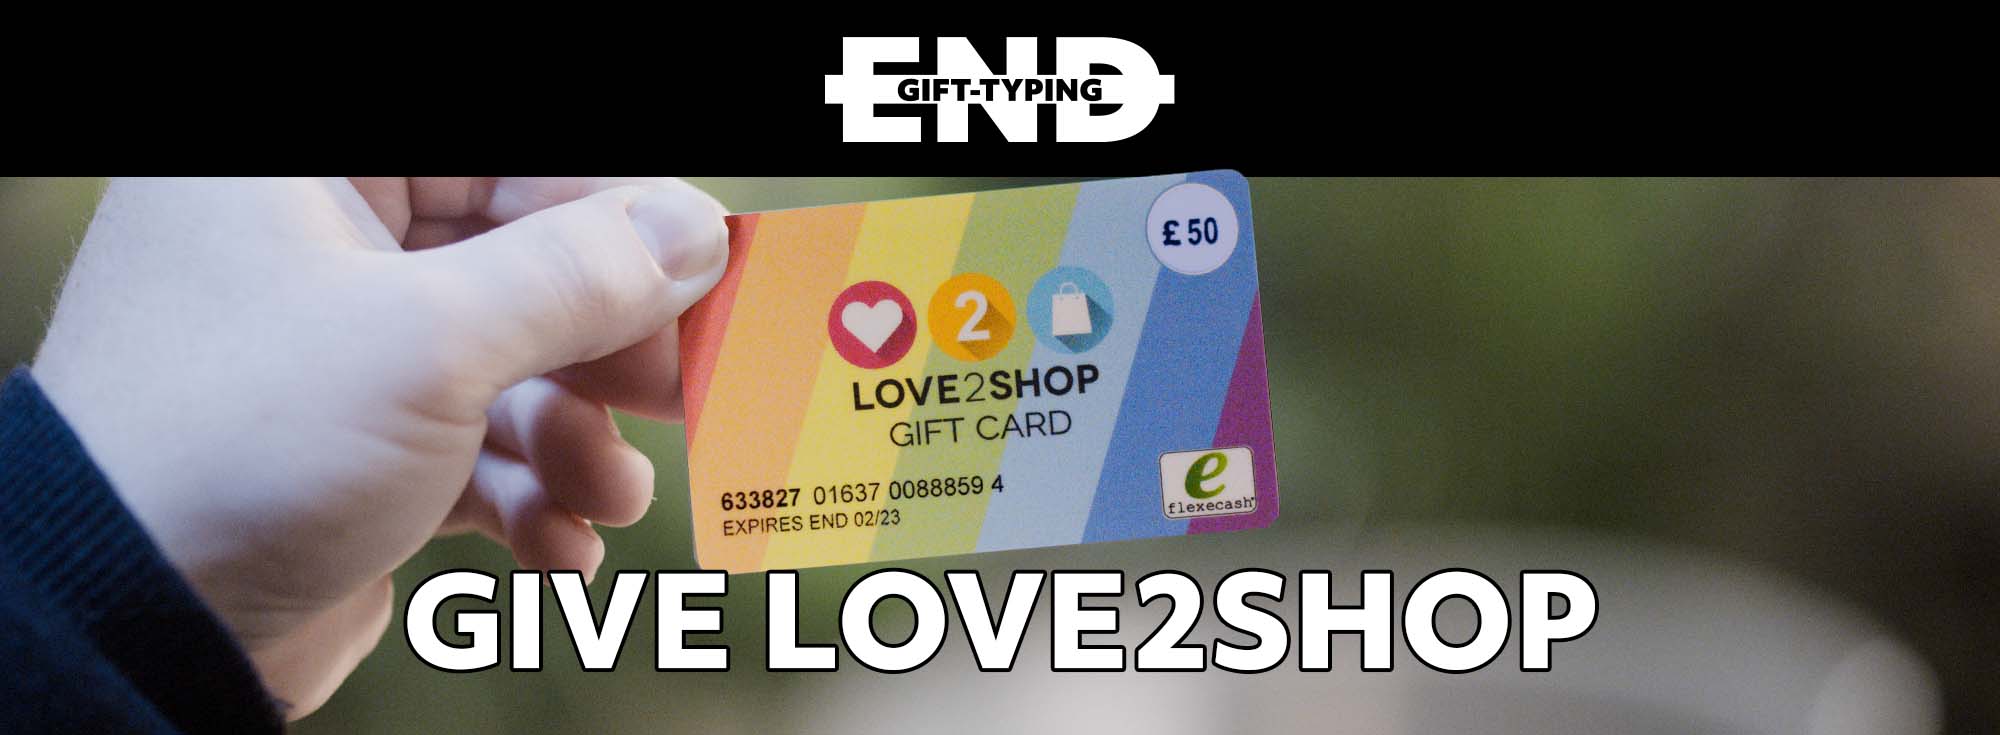 End Gift-Typing, Give Love2shop